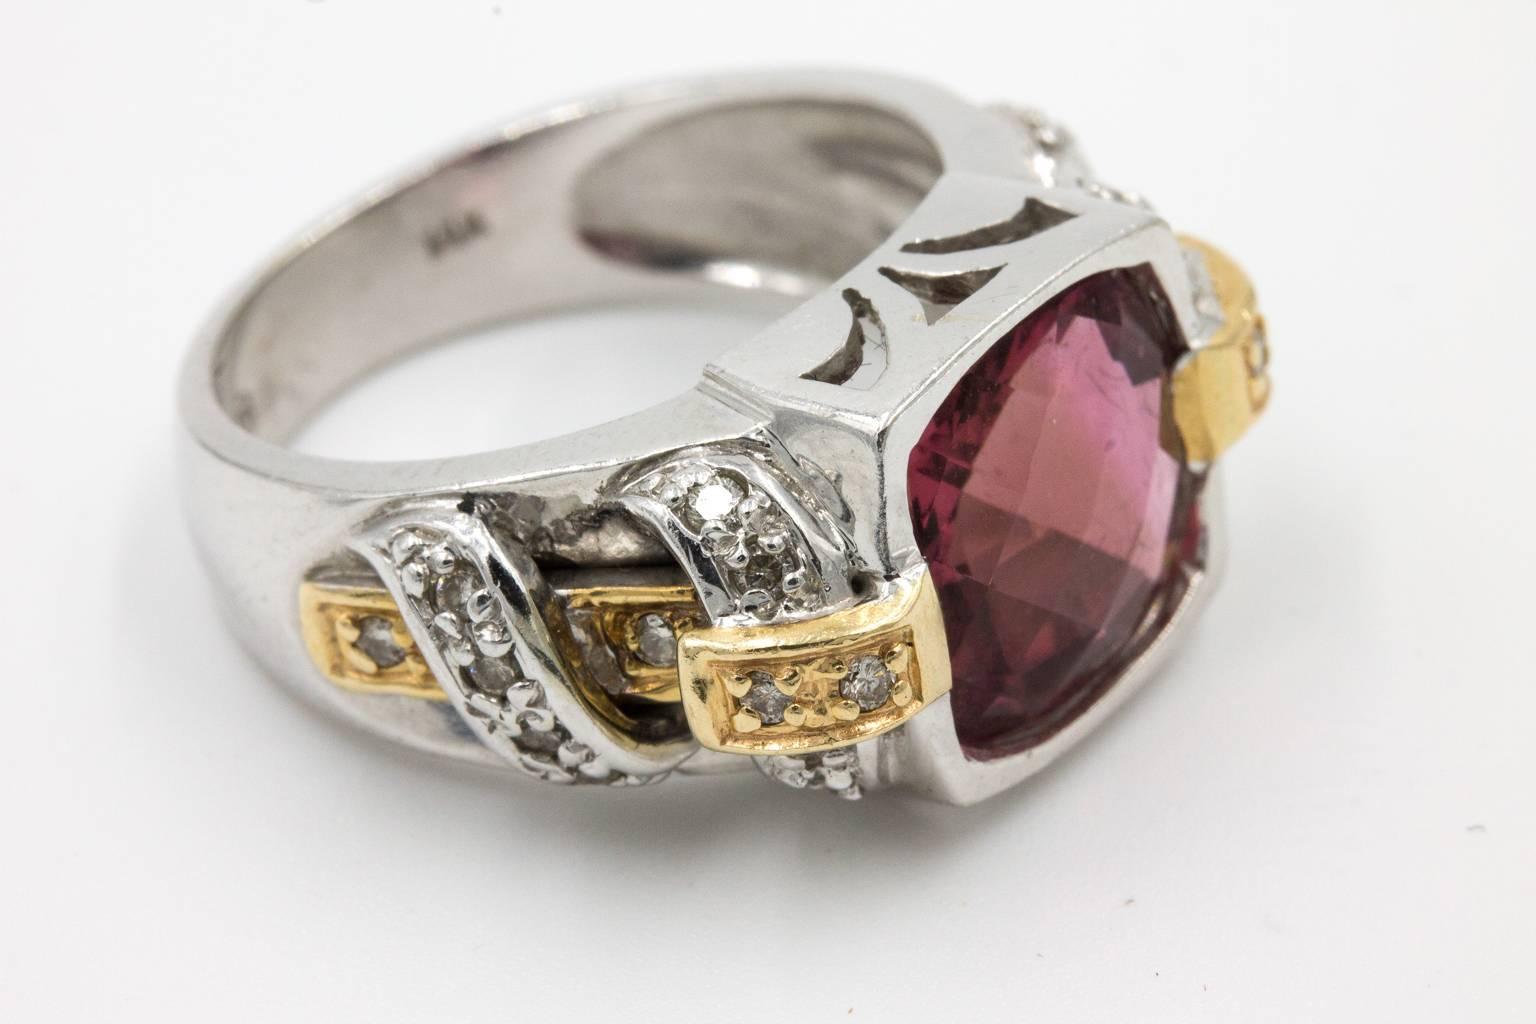 Cocktail ring with a cushion cut pink tourmaline center stone, surrounded by 24 sparkling diamonds and set in a stylish two-tone mounting. The setting is a white gold shank with yellow gold shoulders and details which are all cast in 14K gold. The